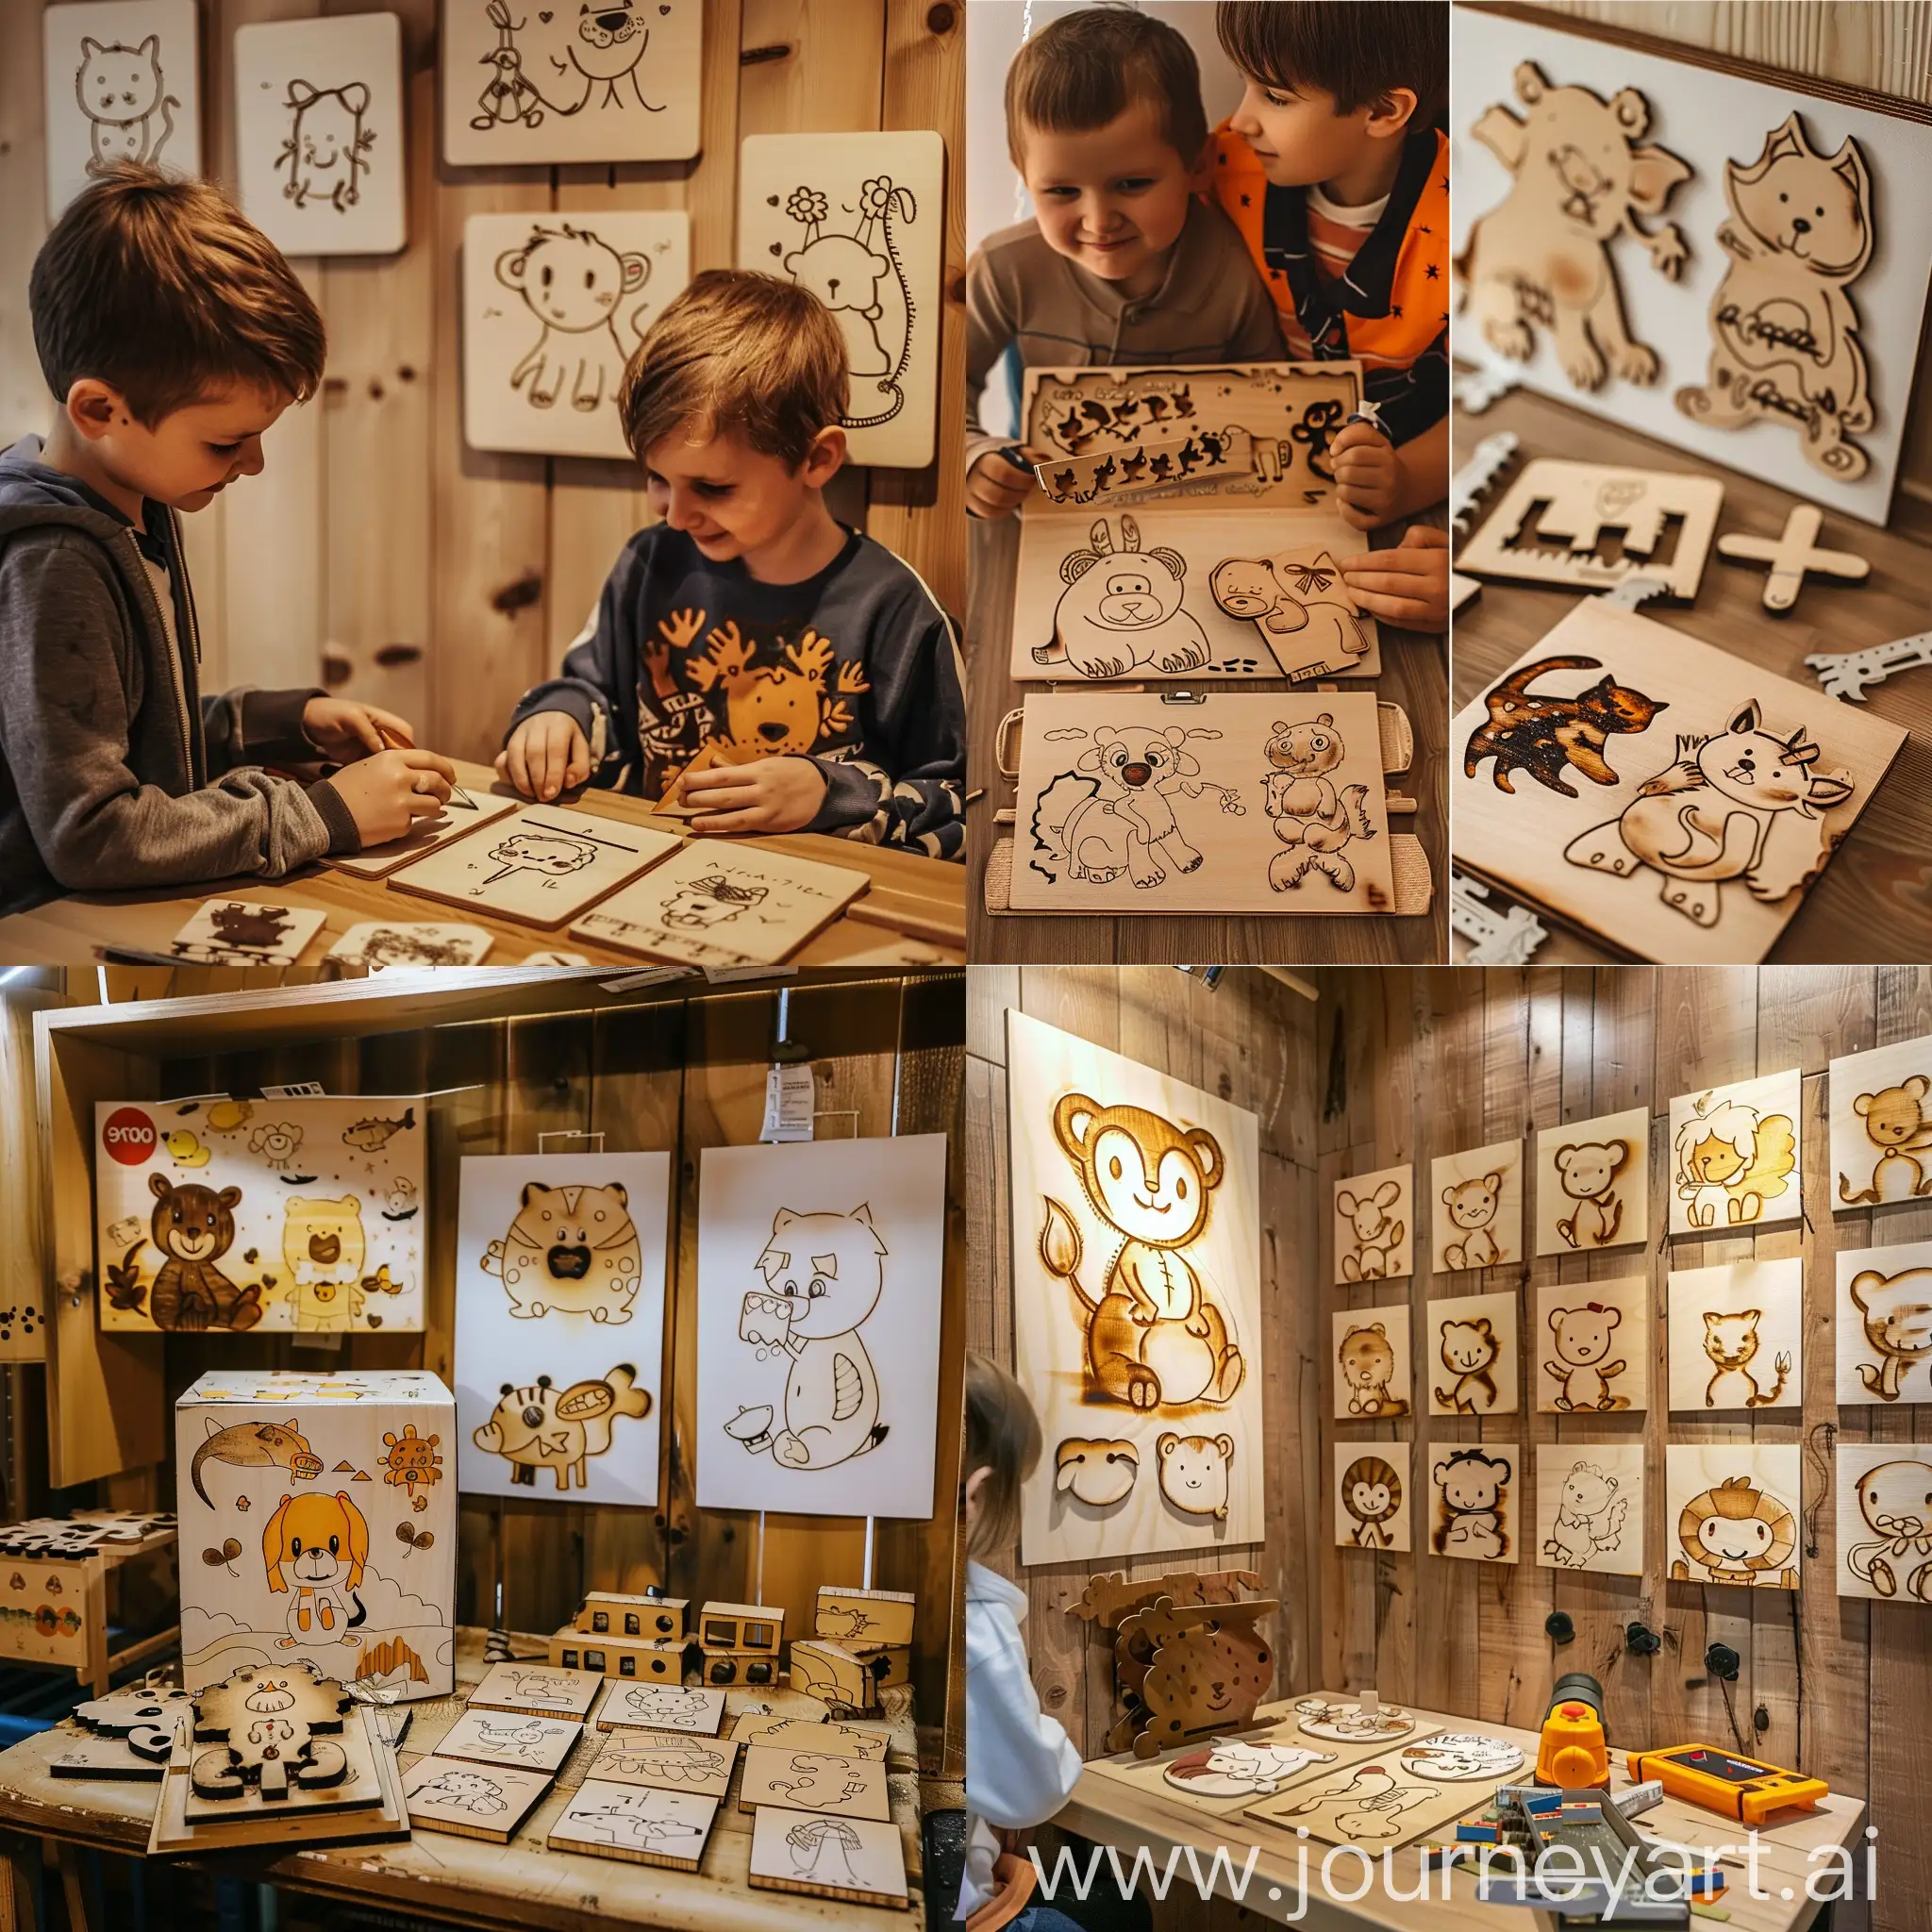 In the children's room children with the help of their parents burn cute animals on 3 mm thick A4 plywood. Next to it is an opened package of 9 pieces of A4 3 mm boards. Also on the table is a jigsaw for wood cutting. Cozy creative atmosphere, evening, on the walls - ready-made burnt images on plywood with children's motifs and children's drawings cut with a jigsaw.